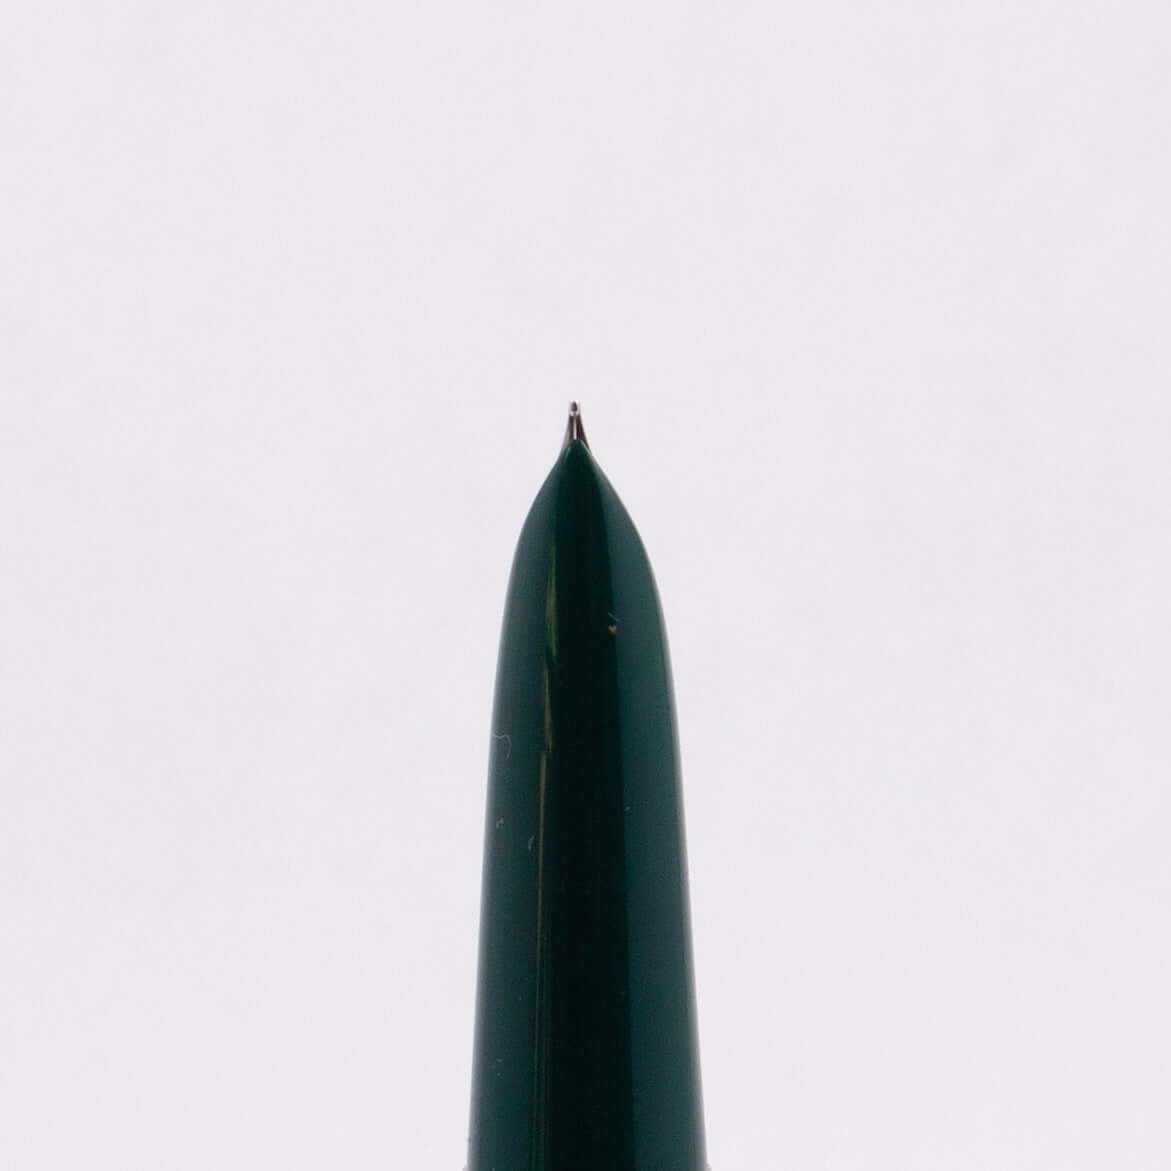 Parker 21, Deluxe Aerometric Filler, Green, Brushed Cap and Ridged Clip Type: Parker Fountain Pen Product Name: Parker 21 Deluxe Manufacture Year: 1952 Length: 5 1/4 Filling System: Aerometric Color/Pattern: Green Nib Type/Condition and remarks: Fine Stee